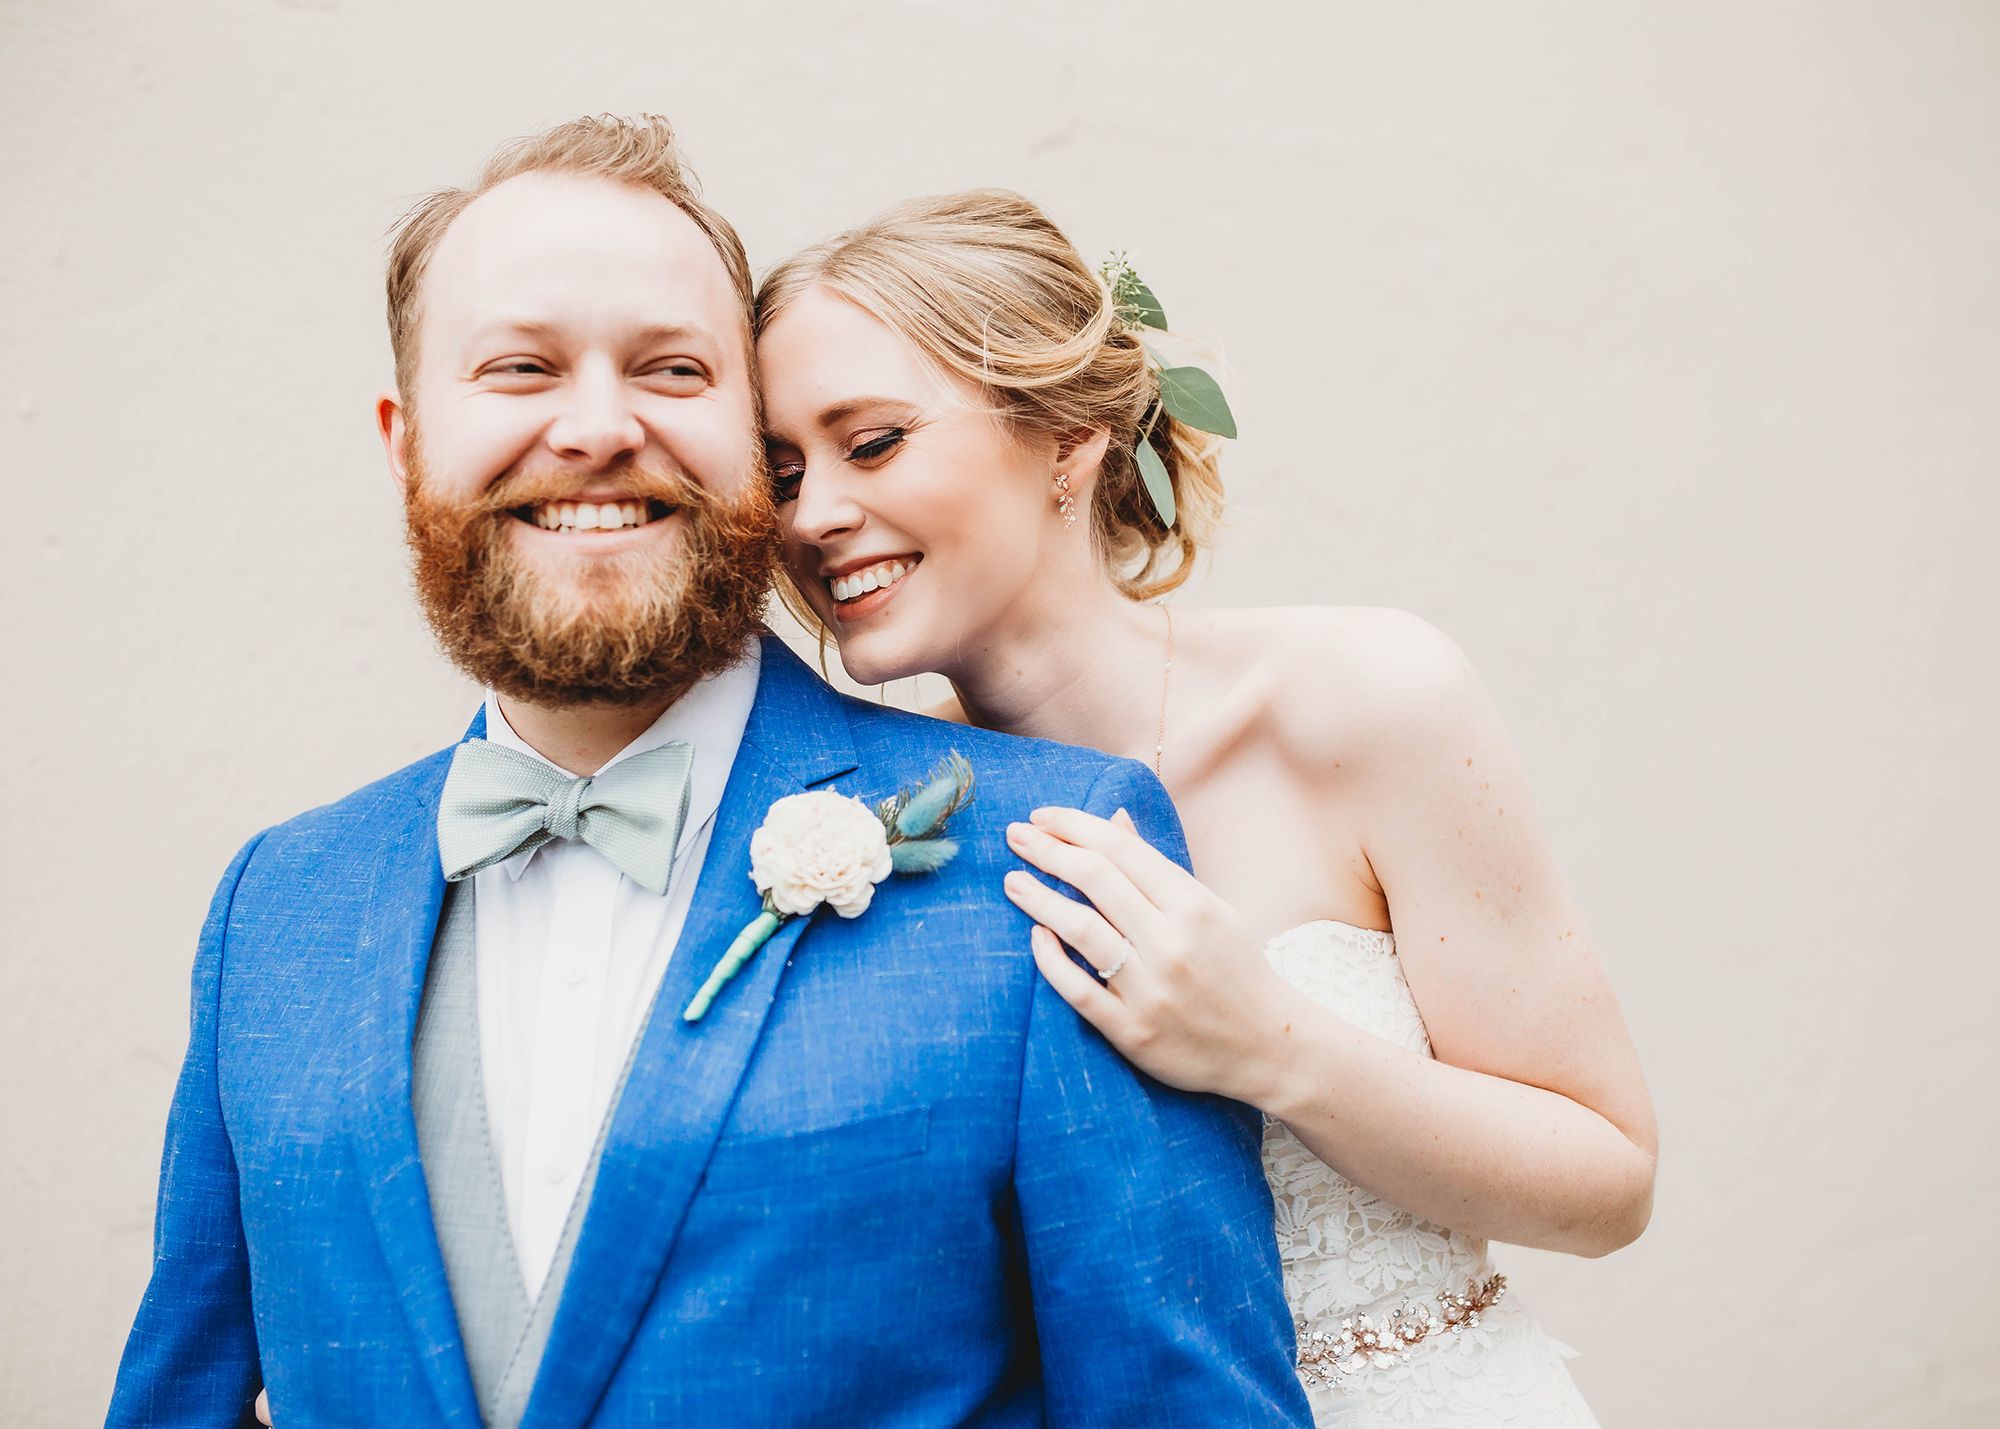 Smiling bride and groom wearing blue suit.